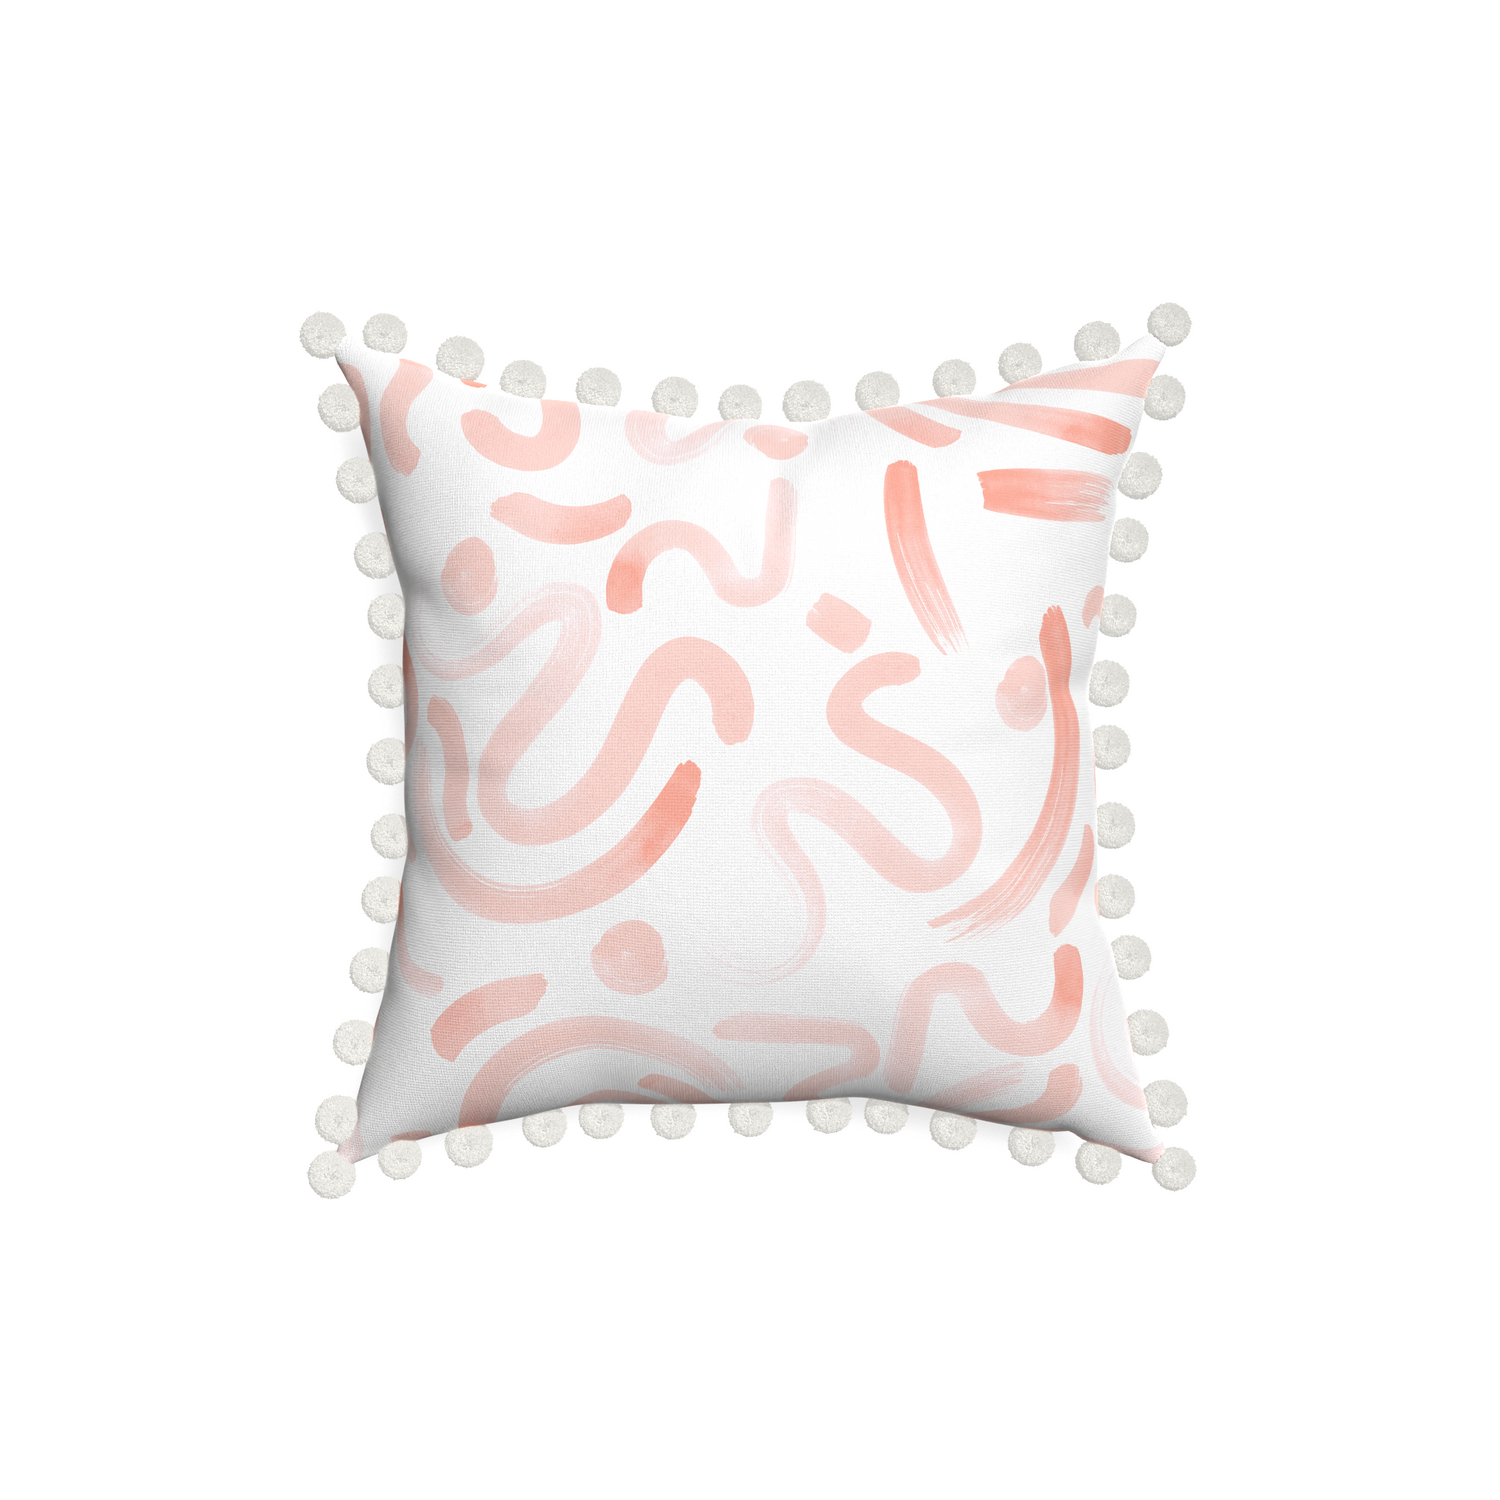 18-square hockney pink custom pink graphicpillow with snow pom pom on white background